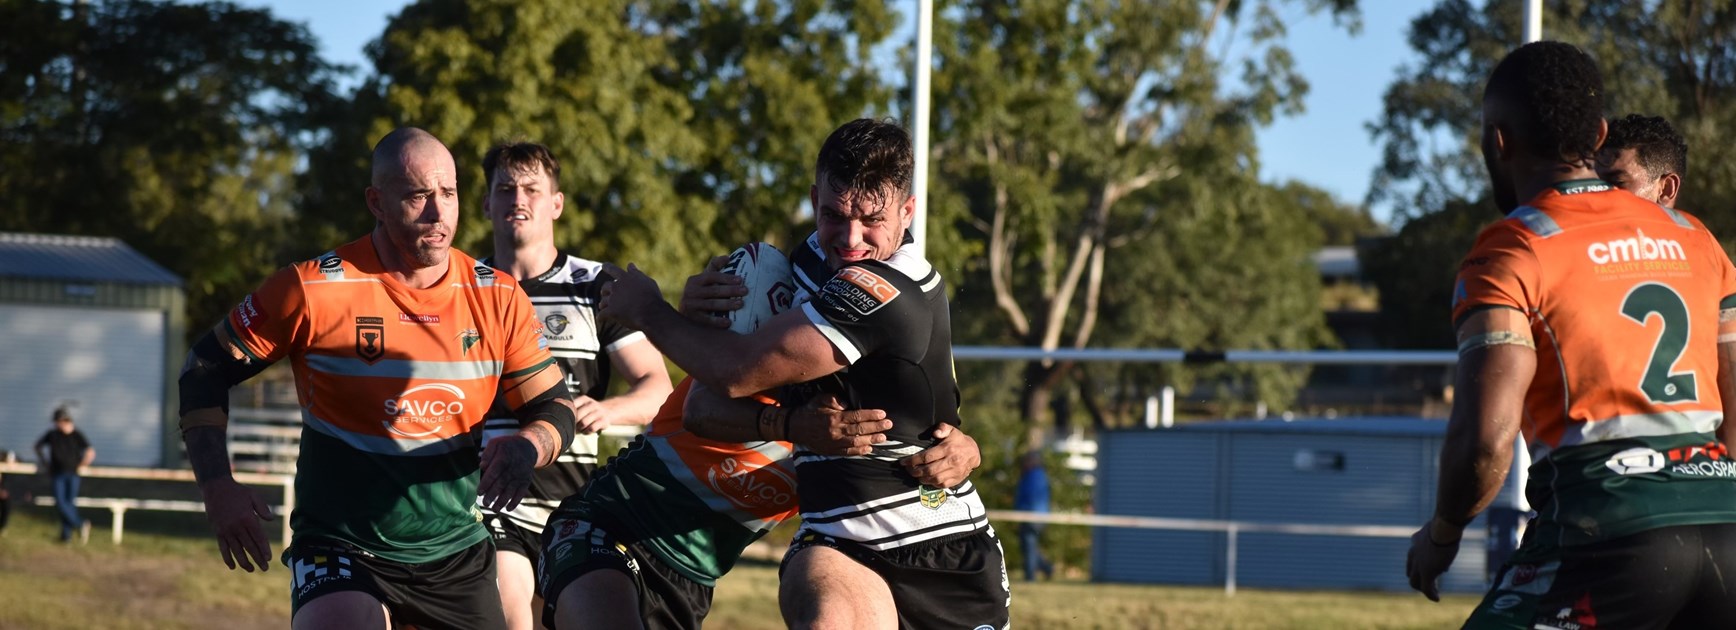 Tweed get the two points with win over Jets in Springsure